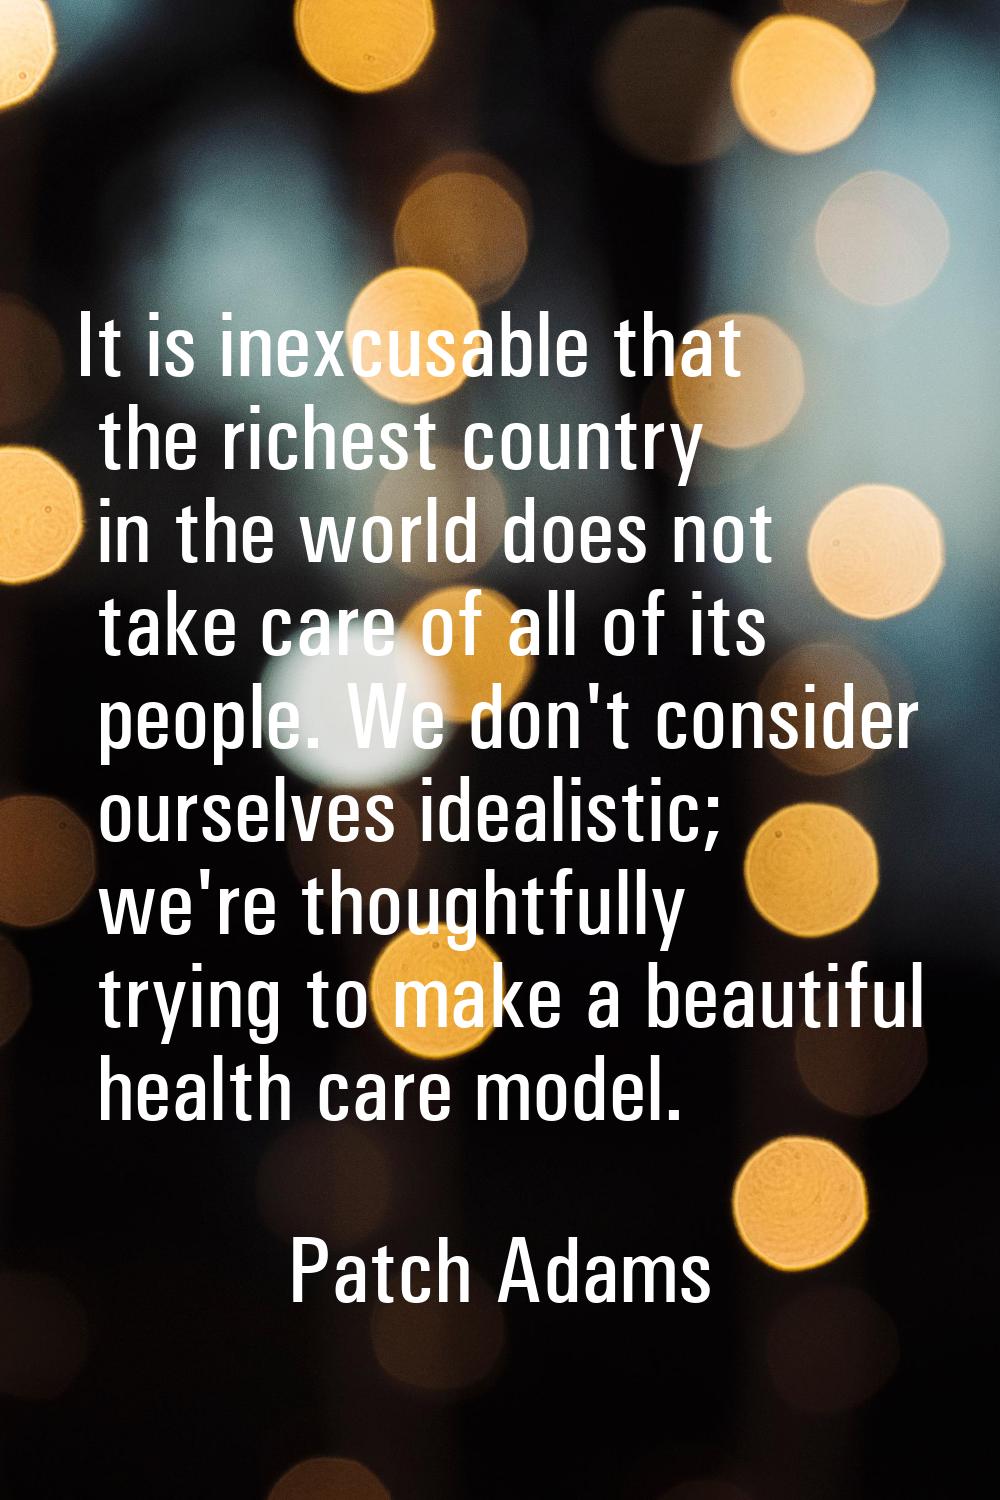 It is inexcusable that the richest country in the world does not take care of all of its people. We